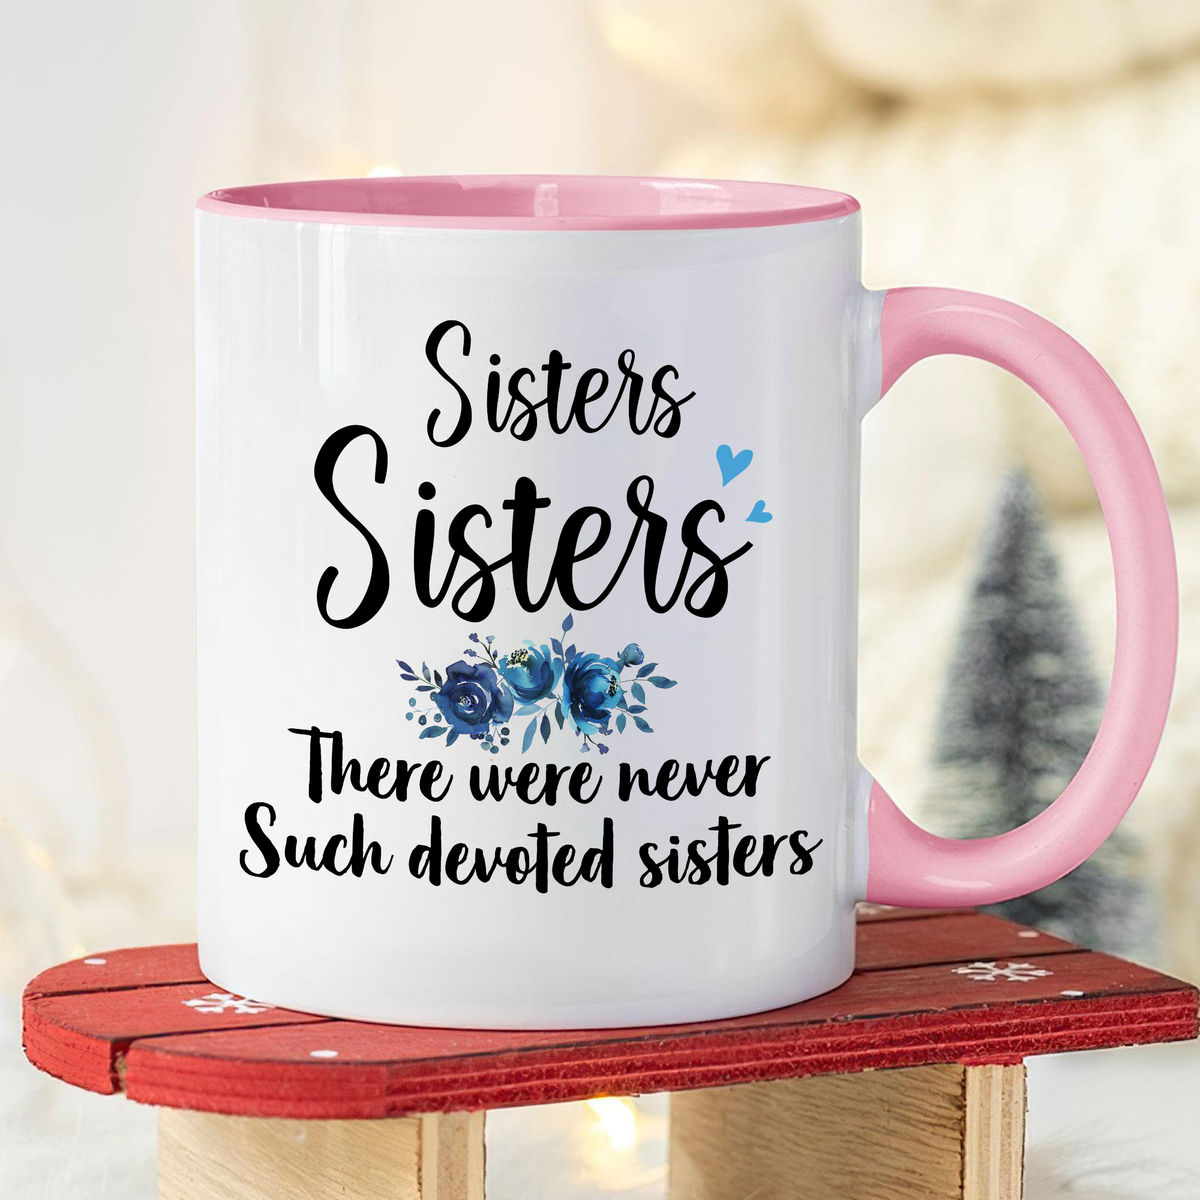 Personalized Mug - Personalized Mug For Sisters - Sisters Sisters - White Christmas - Up To 5 Woman, gift for her, gift for sisters (58095)_2